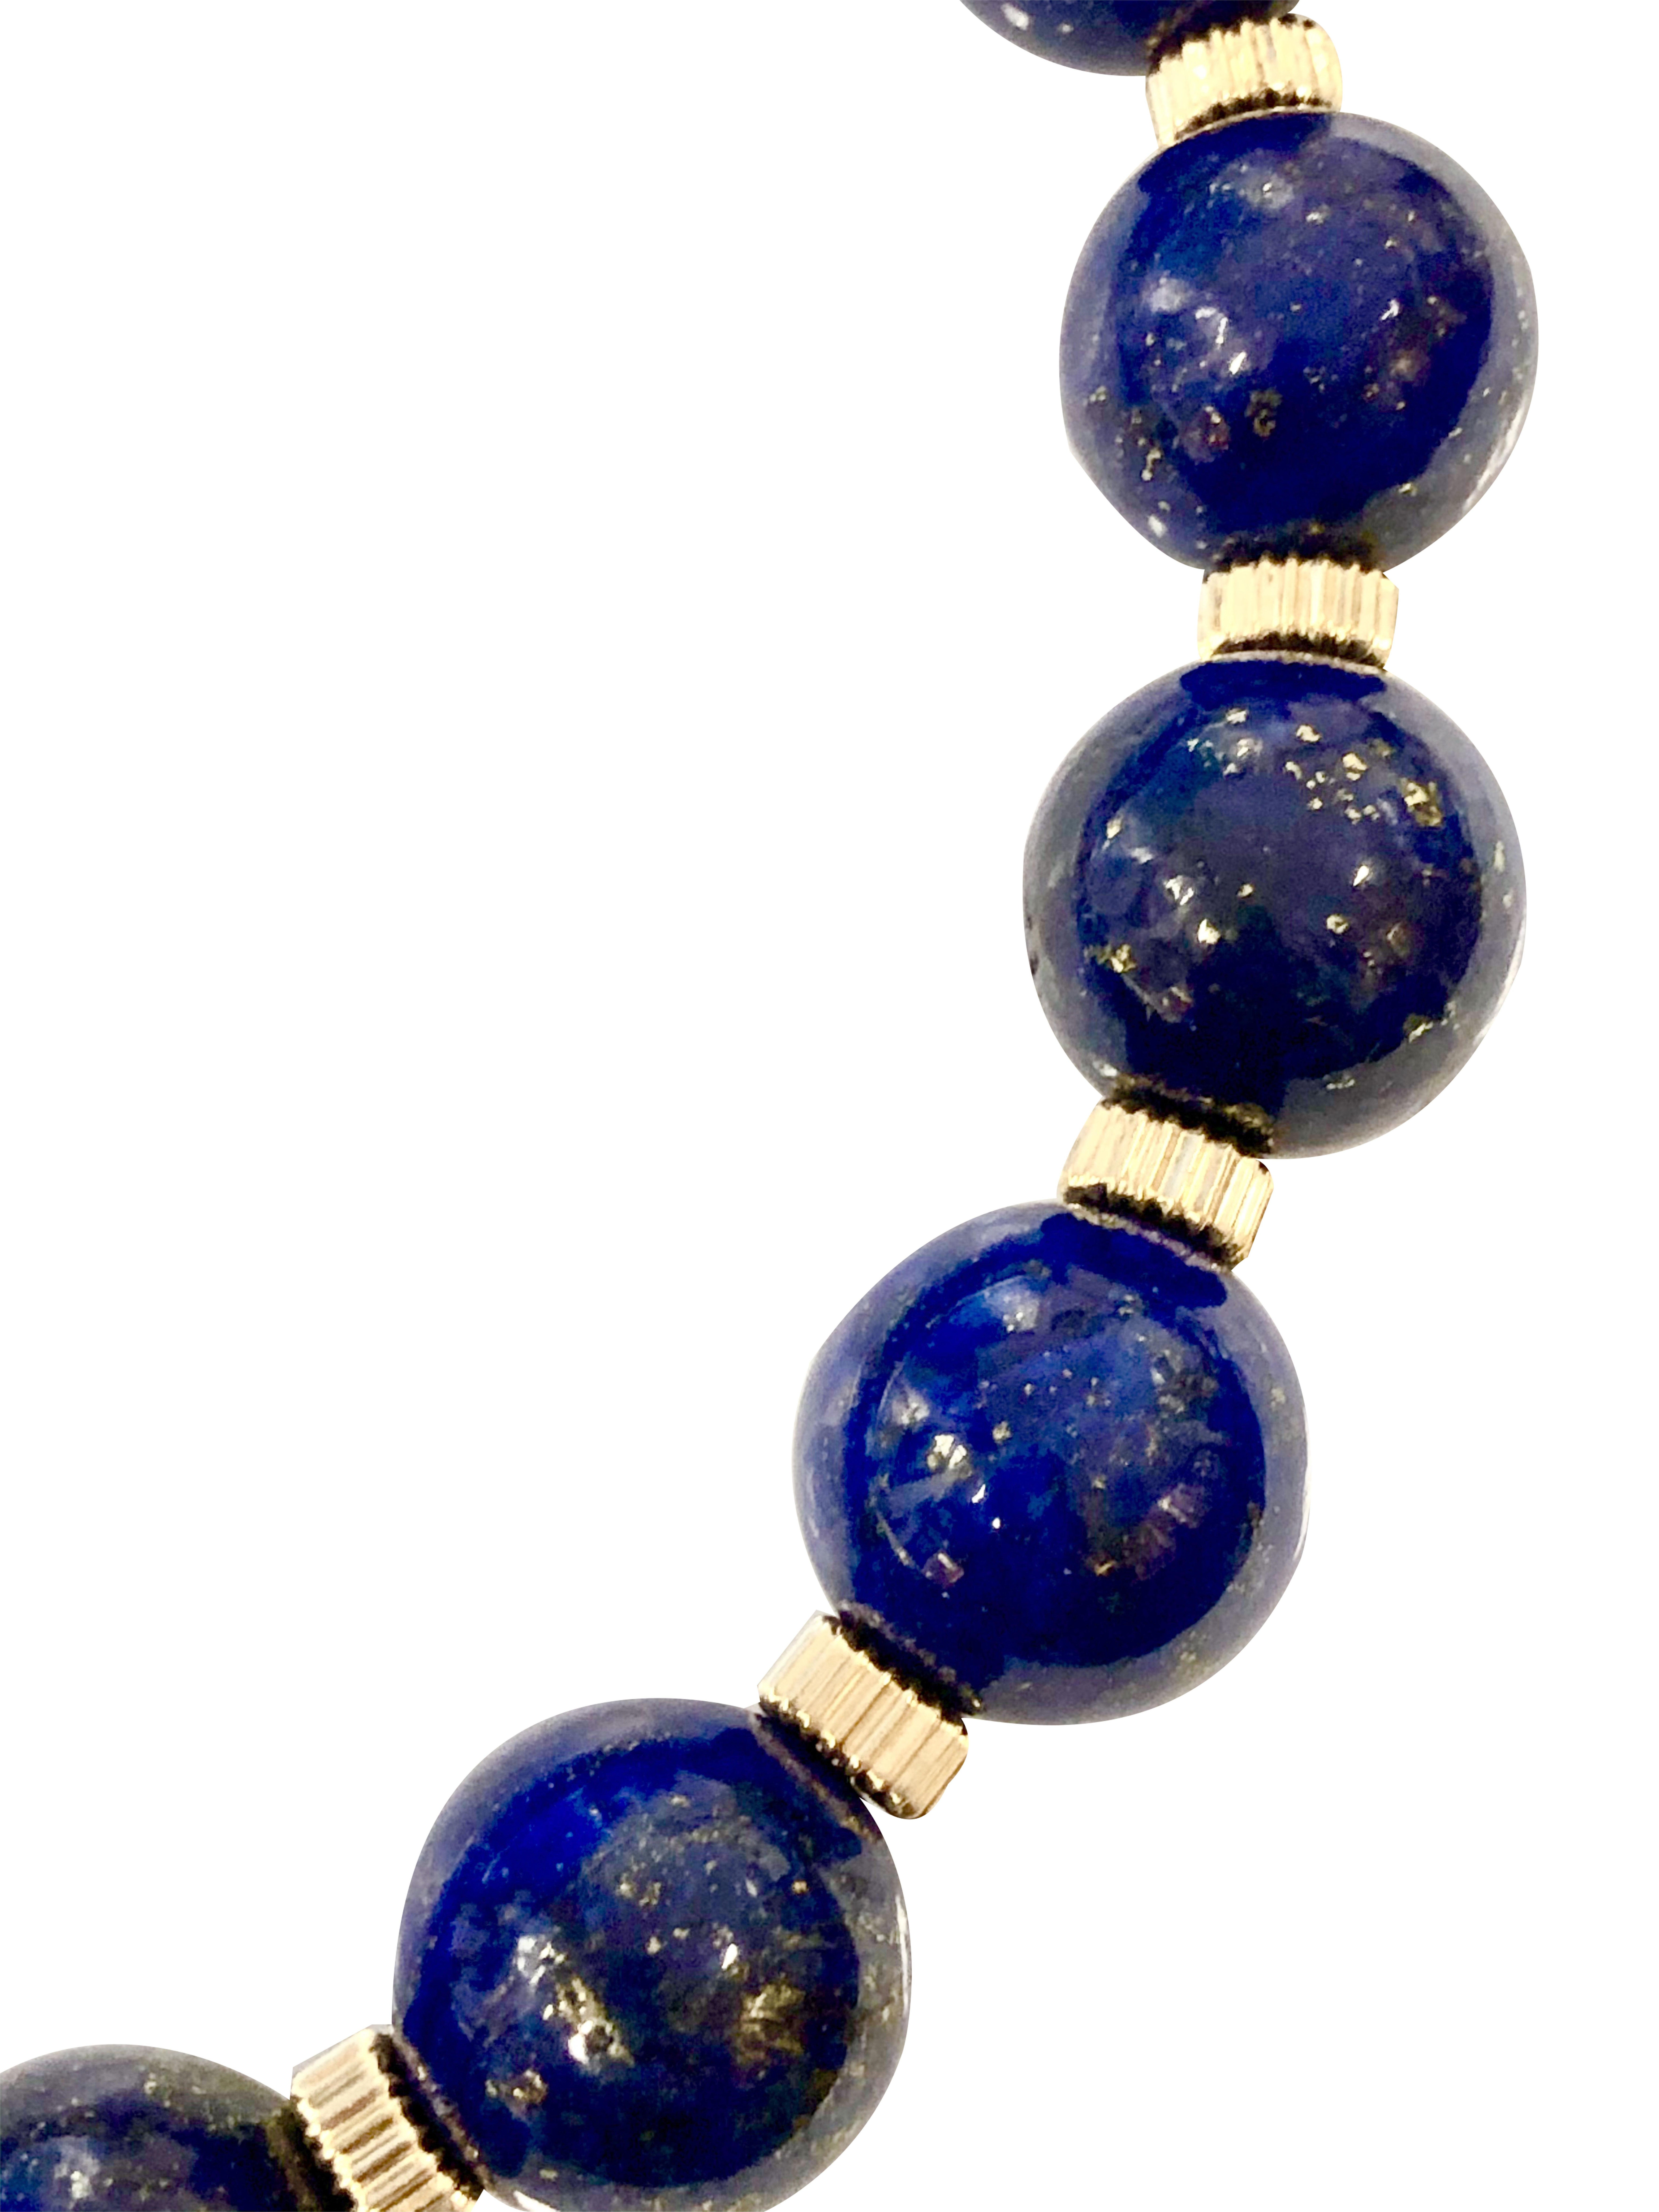 Lapis Lazuli Necklace consisting of High polished Beads each measuring 17.5 M.M. with 14K Yellow Gold Roundels between each bead. 18 inches in length and just over 5/8 inch wide. 